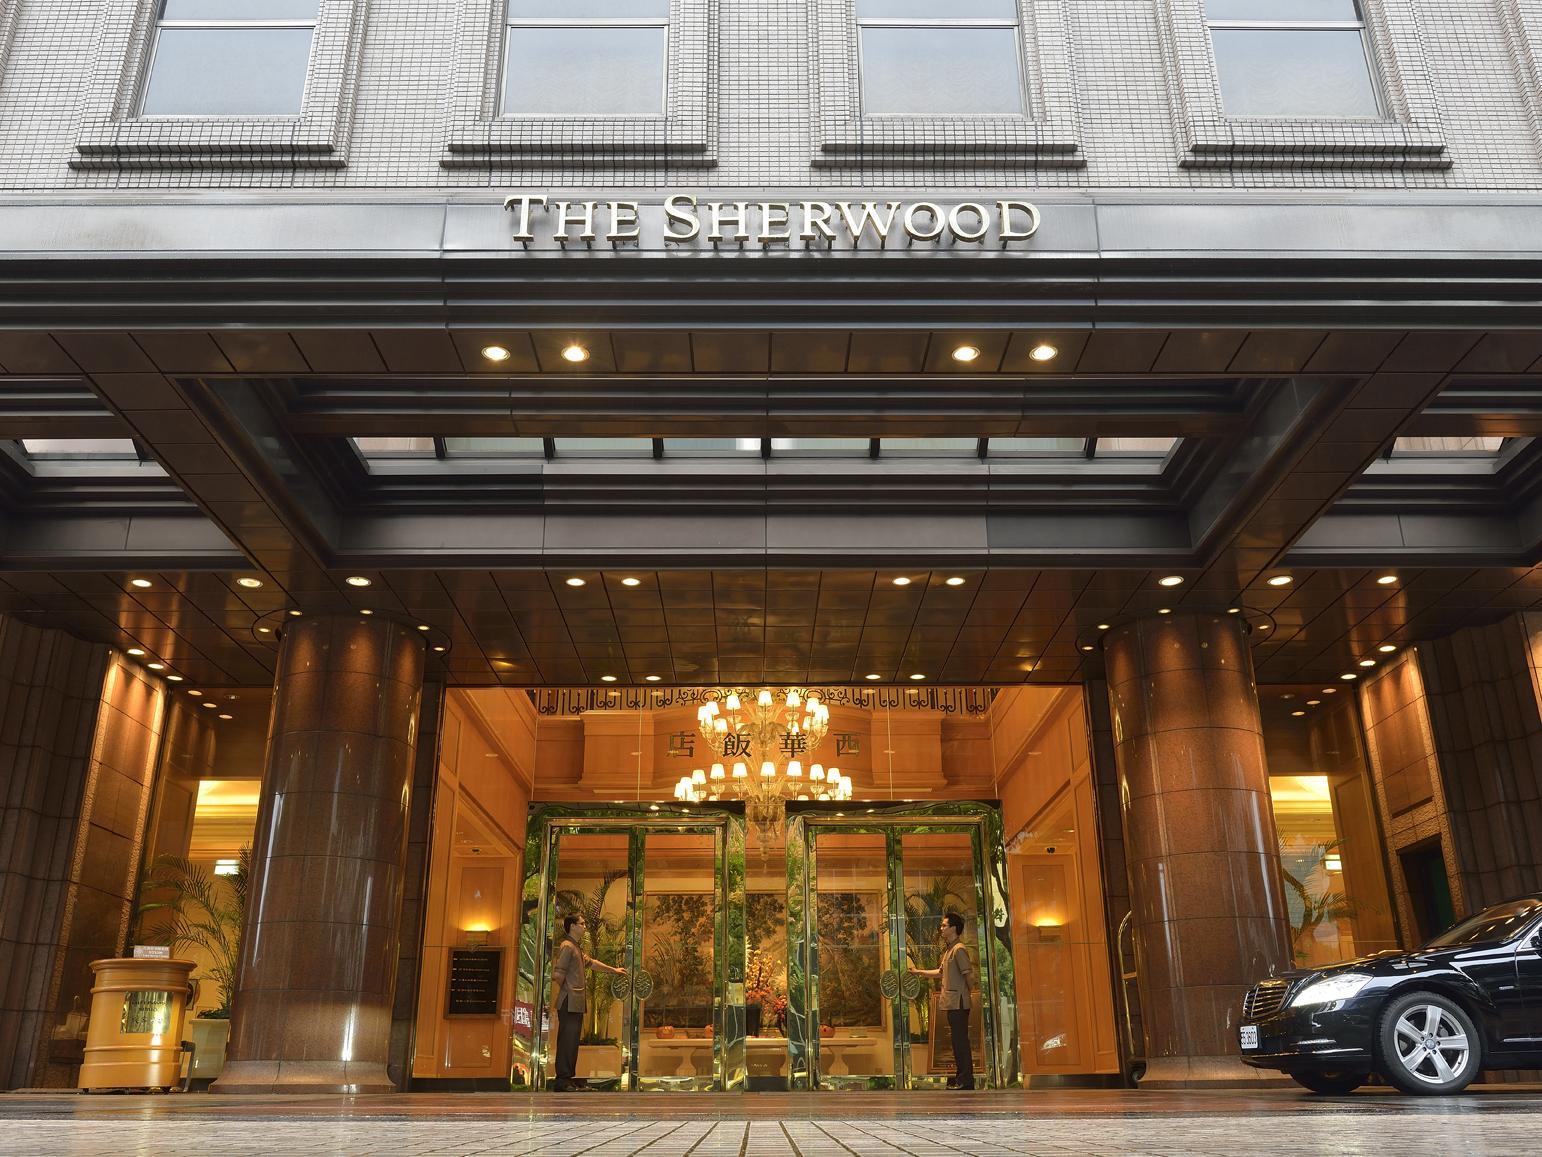 The Sherwood Taipei Taiwan FAQ 2017, What facilities are there in The Sherwood Taipei Taiwan 2017, What Languages Spoken are Supported in The Sherwood Taipei Taiwan 2017, Which payment cards are accepted in The Sherwood Taipei Taiwan , Taiwan The Sherwood Taipei room facilities and services Q&A 2017, Taiwan The Sherwood Taipei online booking services 2017, Taiwan The Sherwood Taipei address 2017, Taiwan The Sherwood Taipei telephone number 2017,Taiwan The Sherwood Taipei map 2017, Taiwan The Sherwood Taipei traffic guide 2017, how to go Taiwan The Sherwood Taipei, Taiwan The Sherwood Taipei booking online 2017, Taiwan The Sherwood Taipei room types 2017.